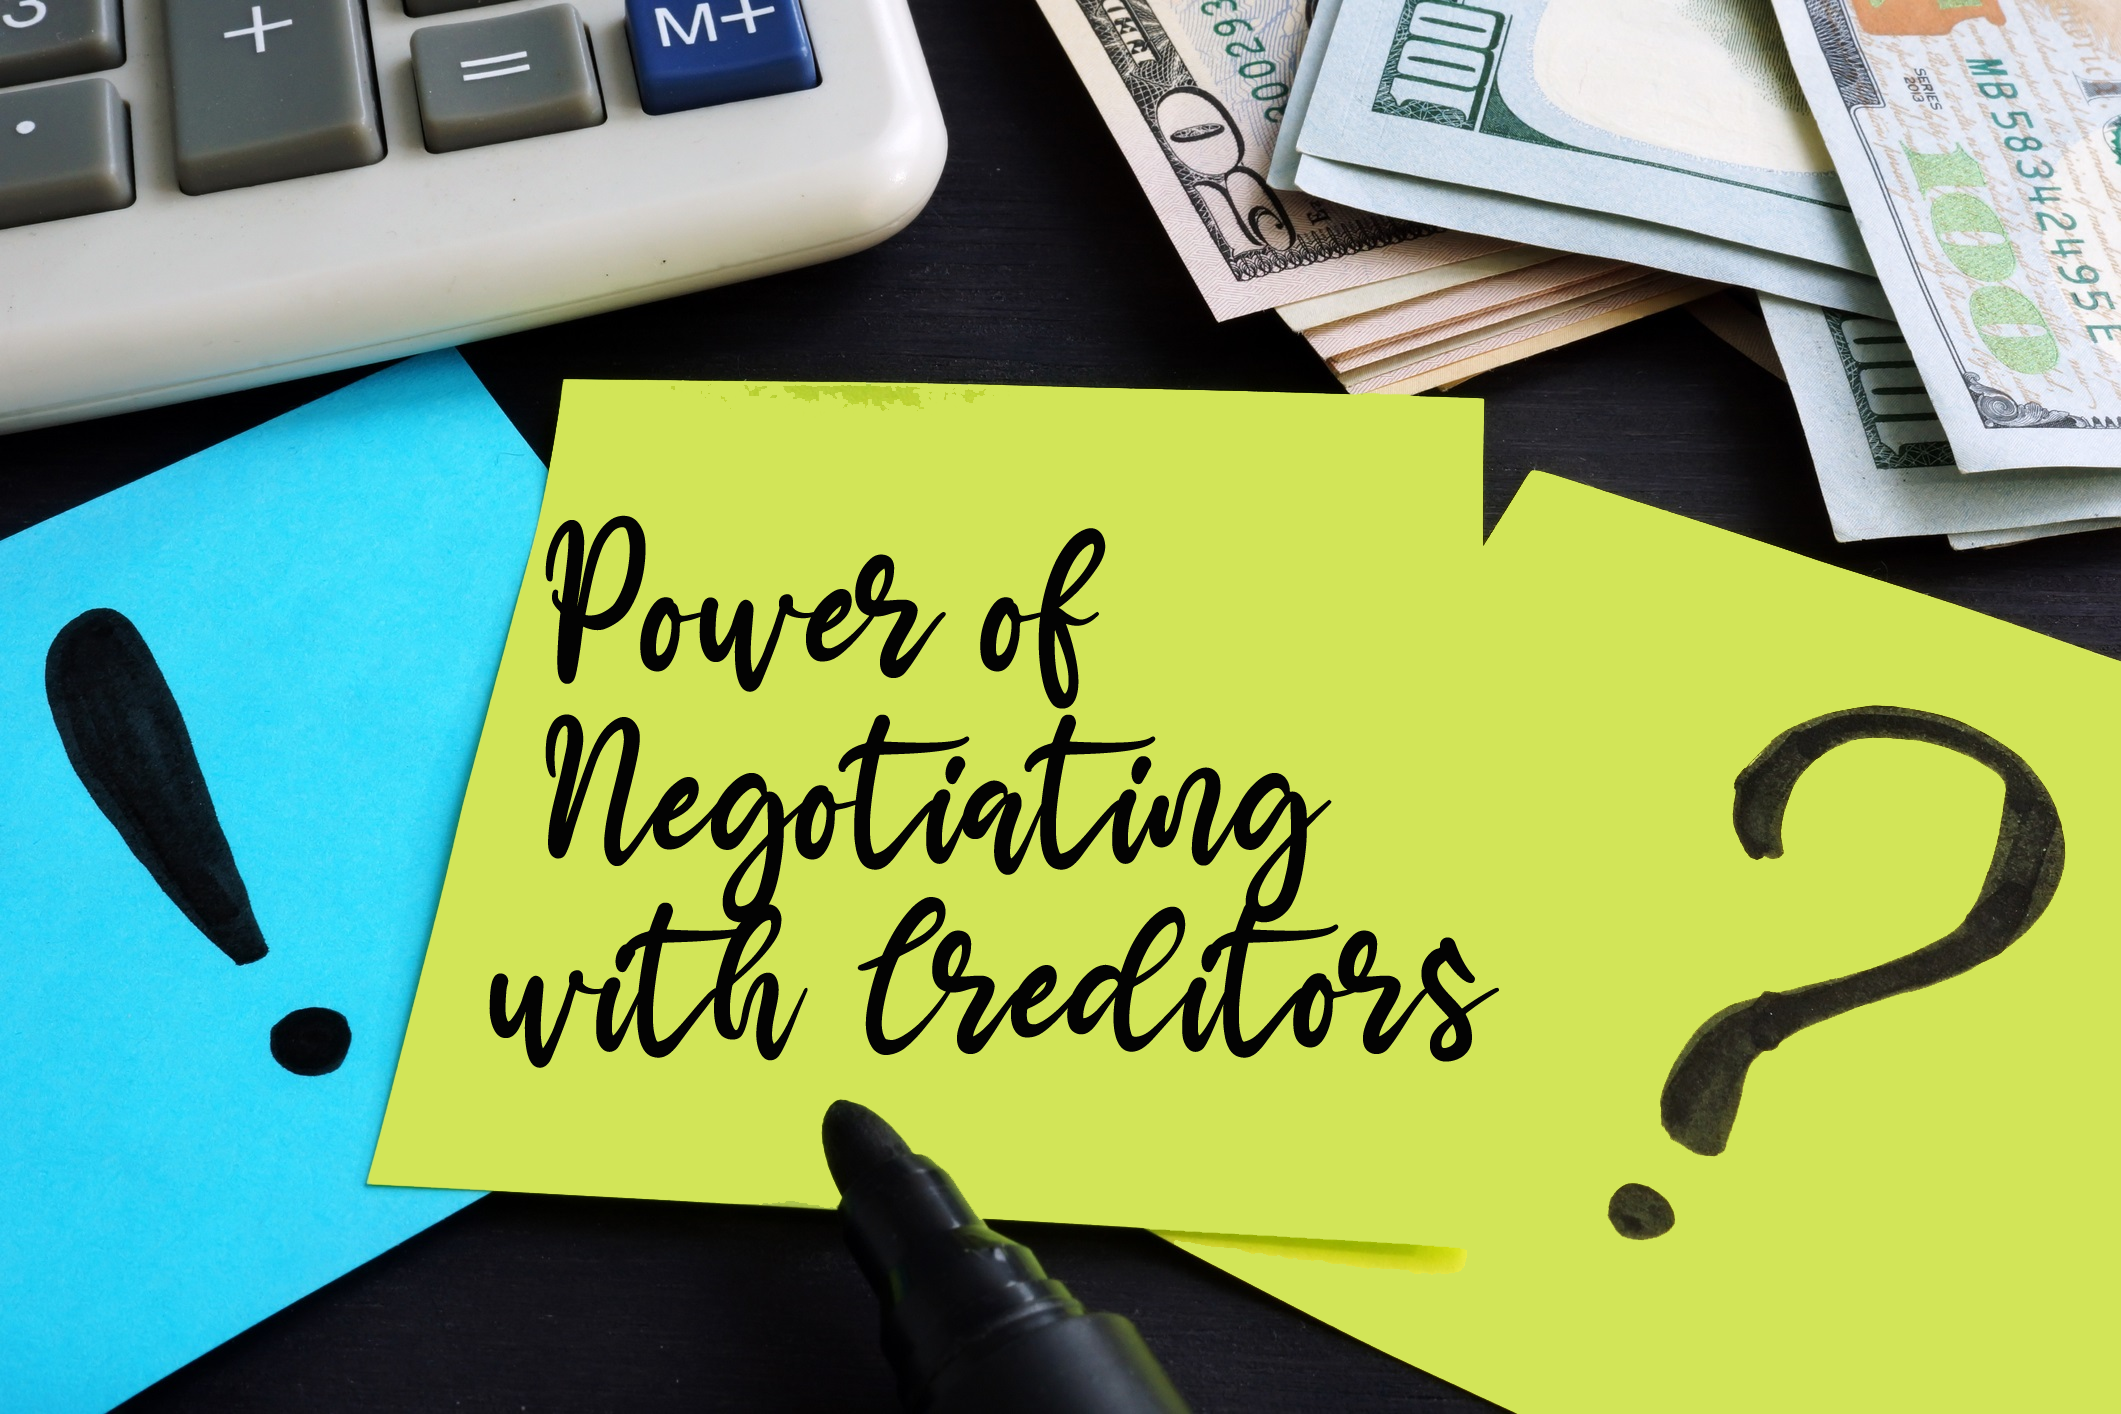 Power of Negotiating with Creditors